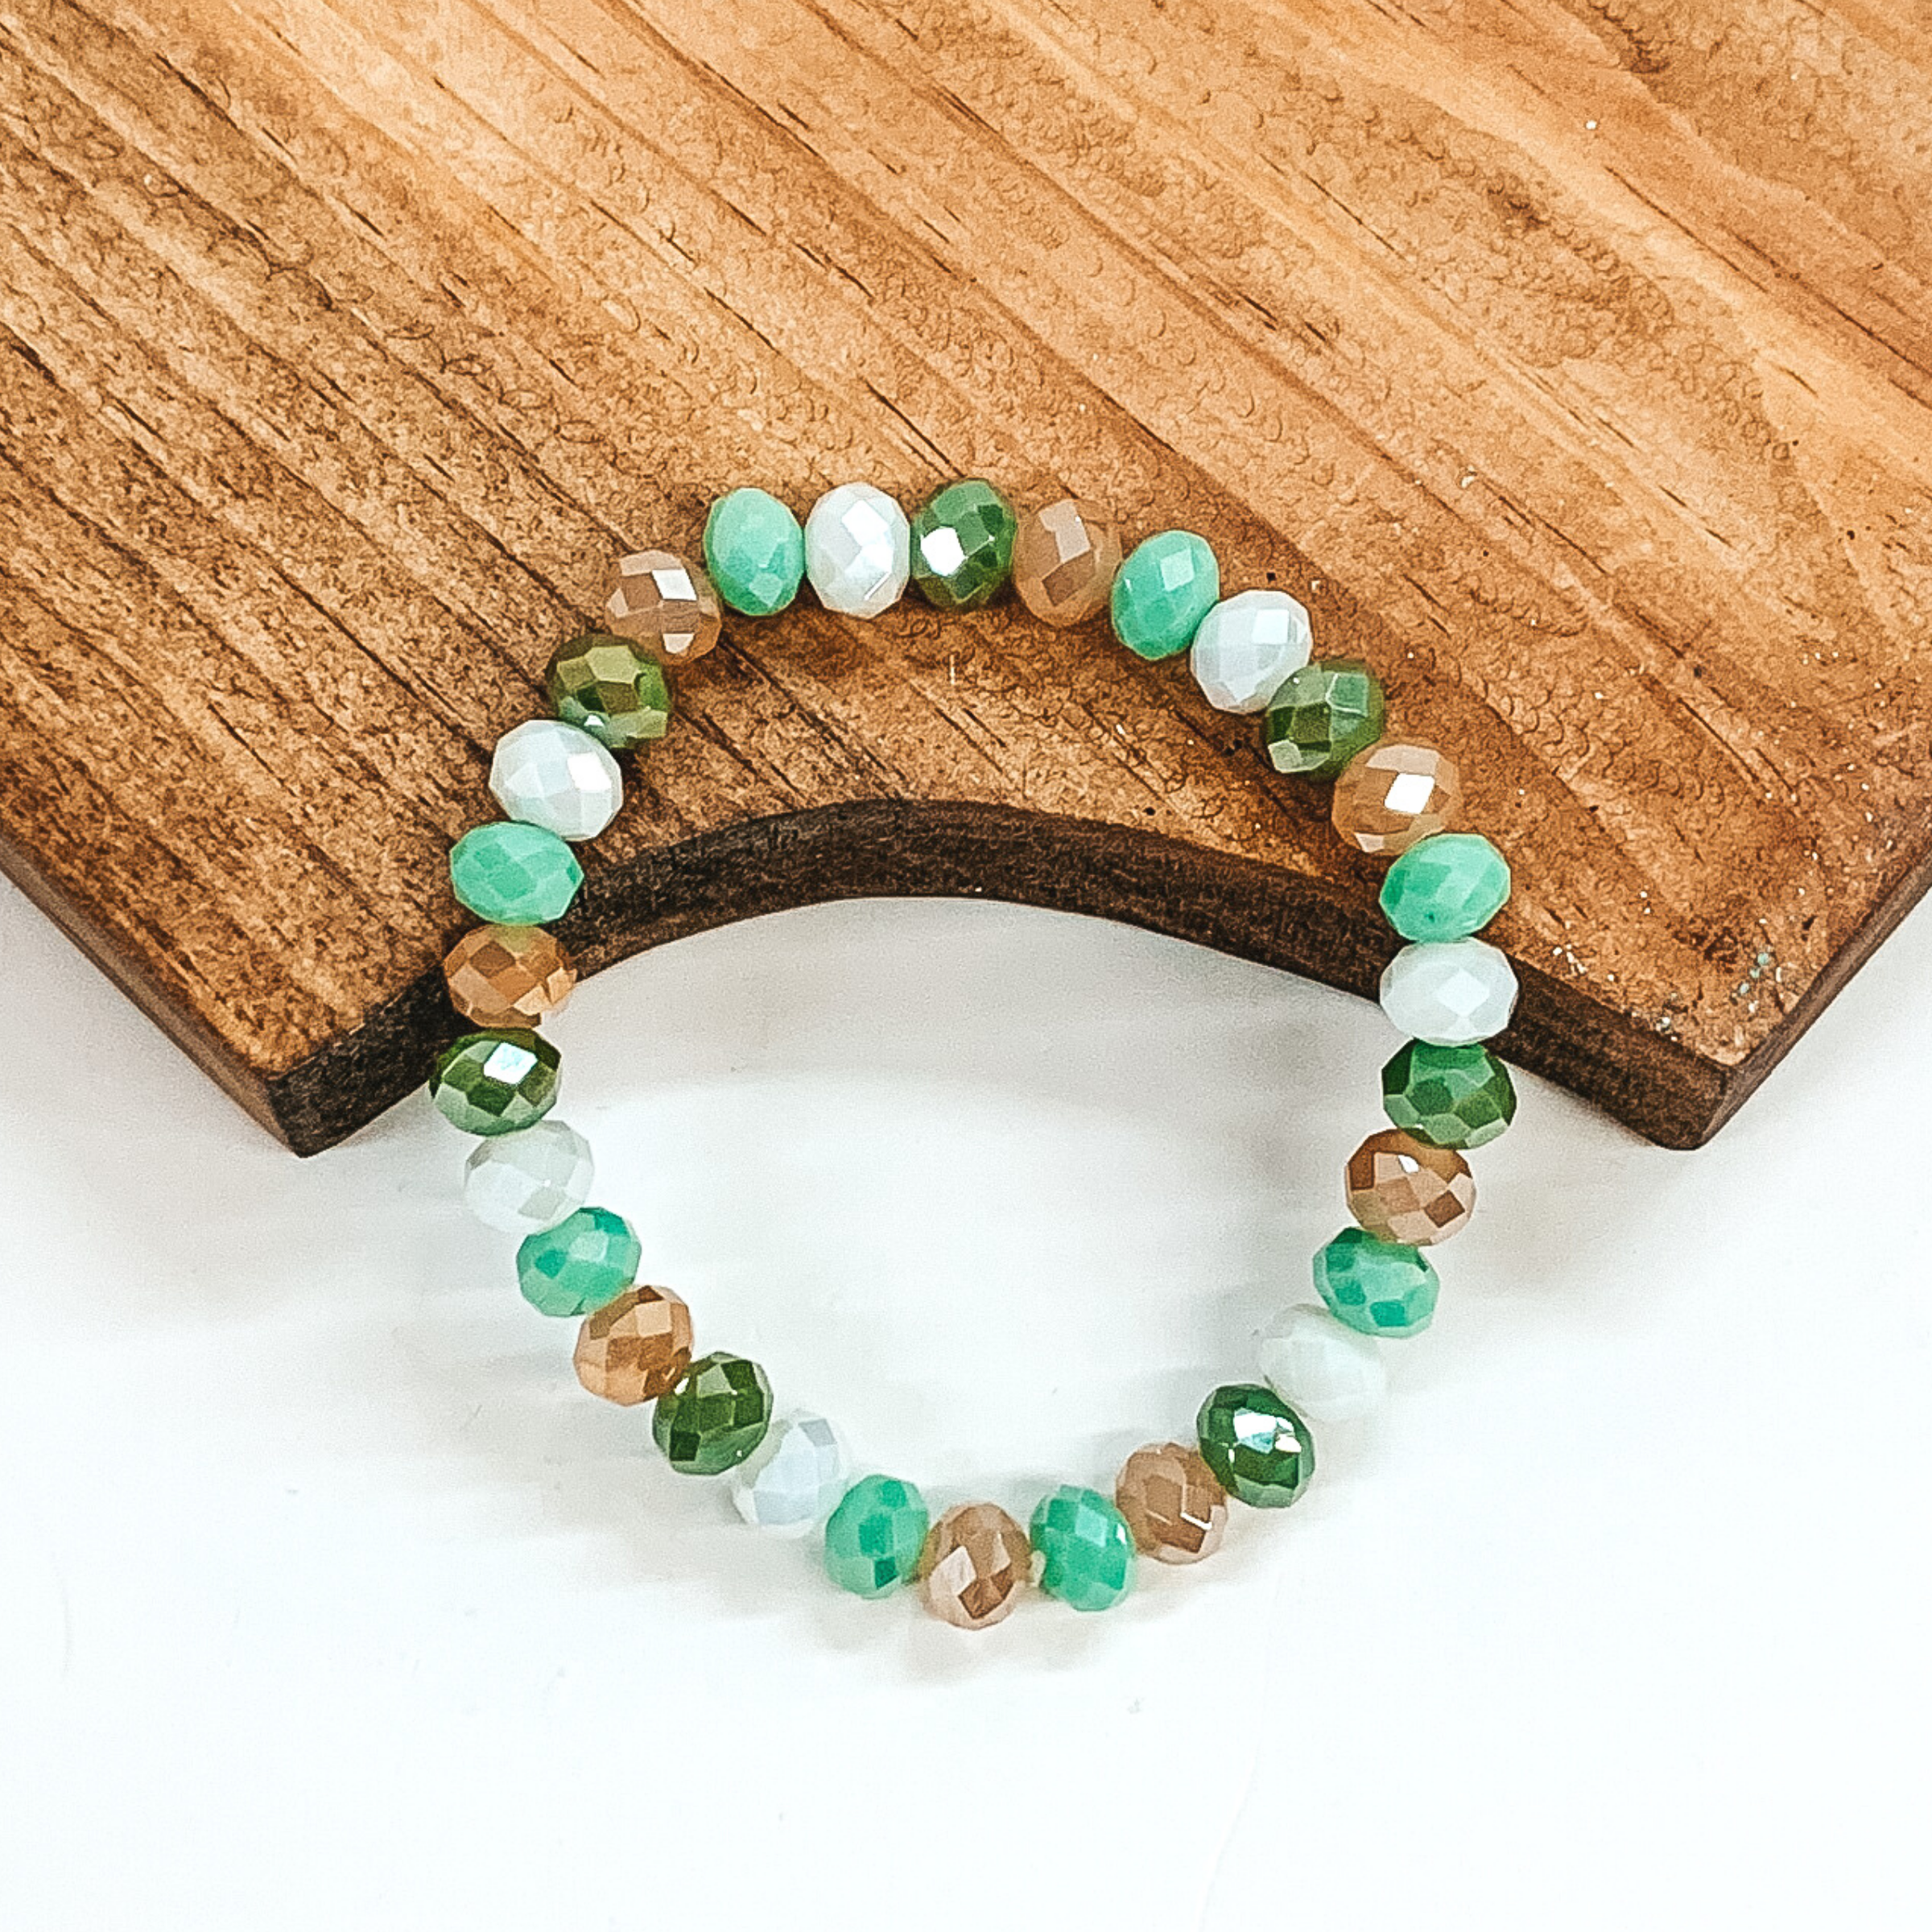 Crystal beaded bracelet in ivory, light green, green, and light brown. This bracelet is pictured on a partially laying on a brown block on a white background.